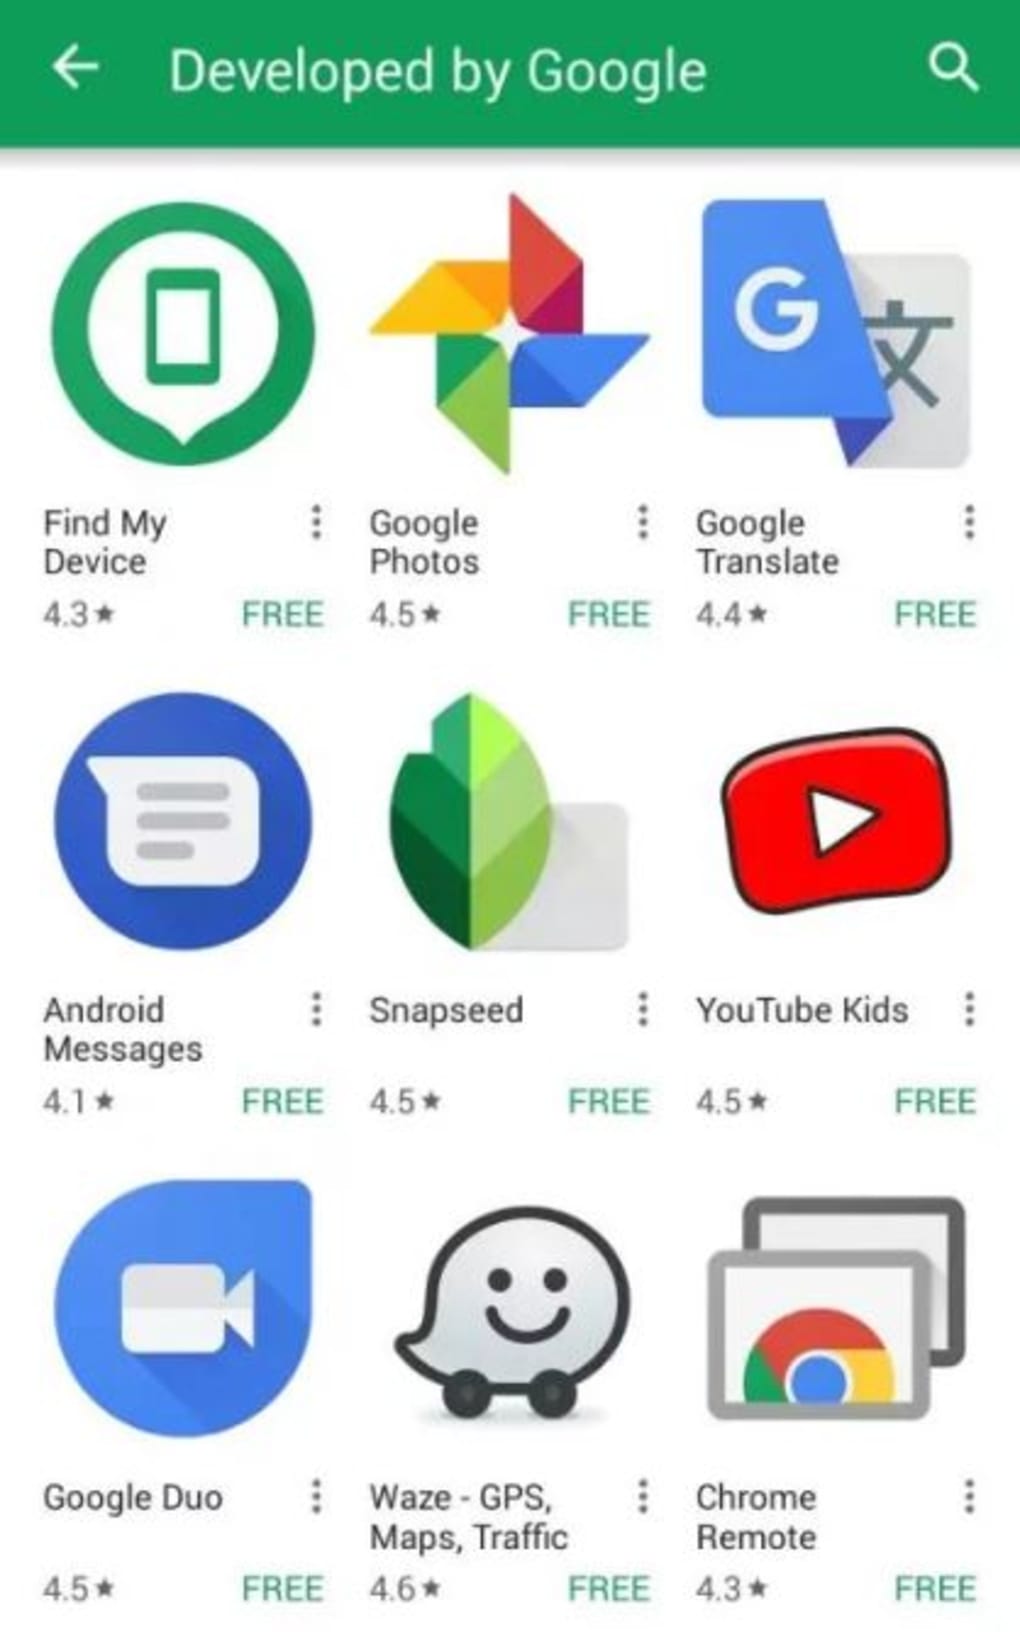 google play services for android 2.3.6 free download